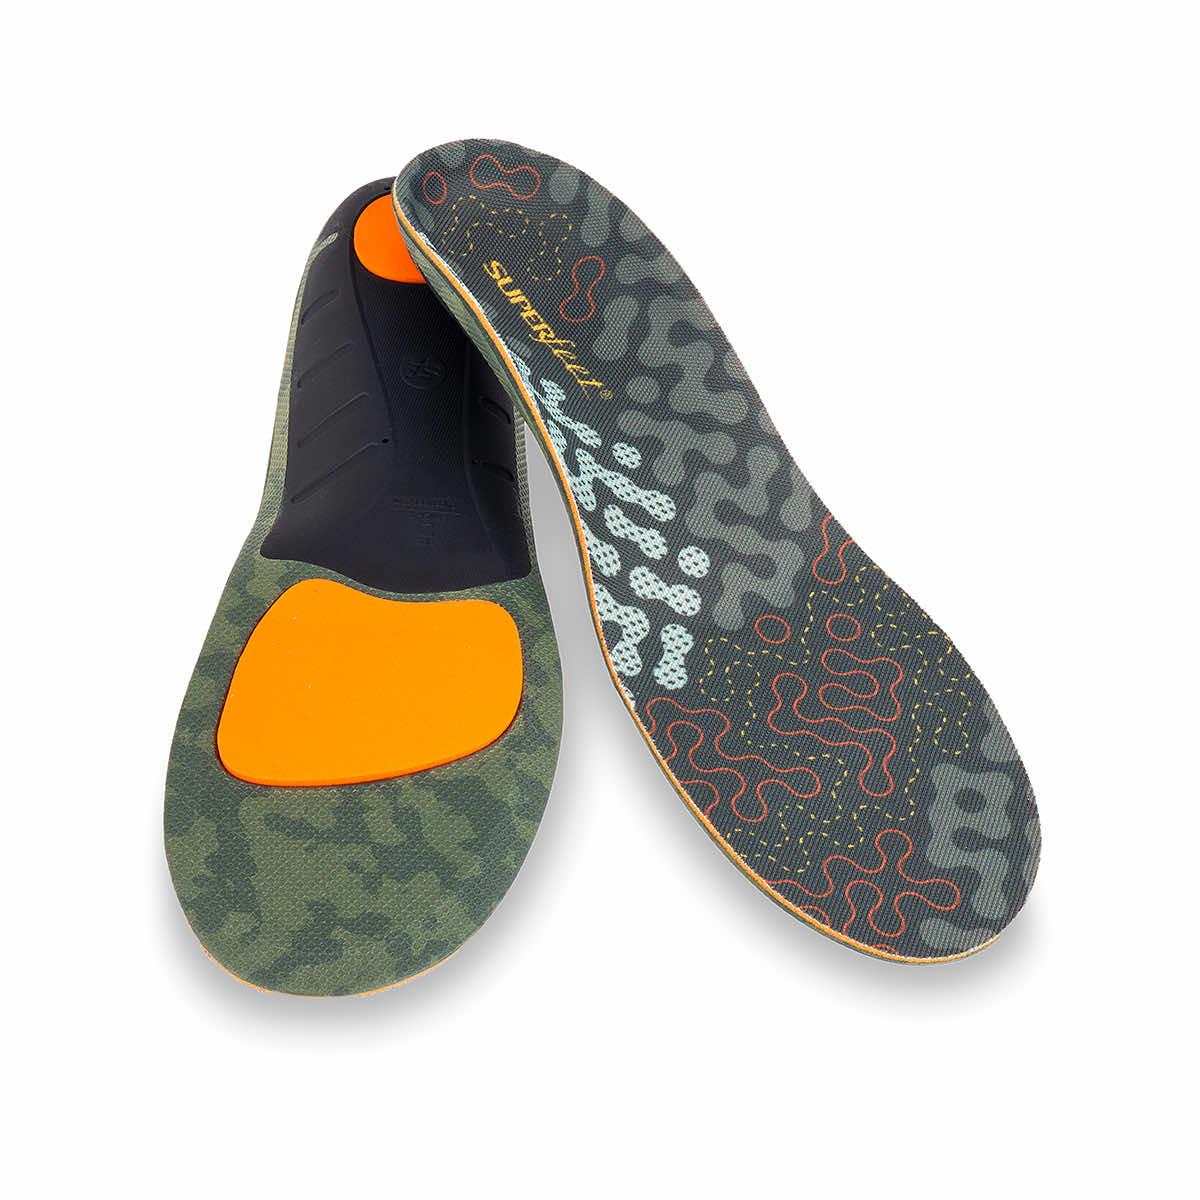  Adapt Hike Max Insoles